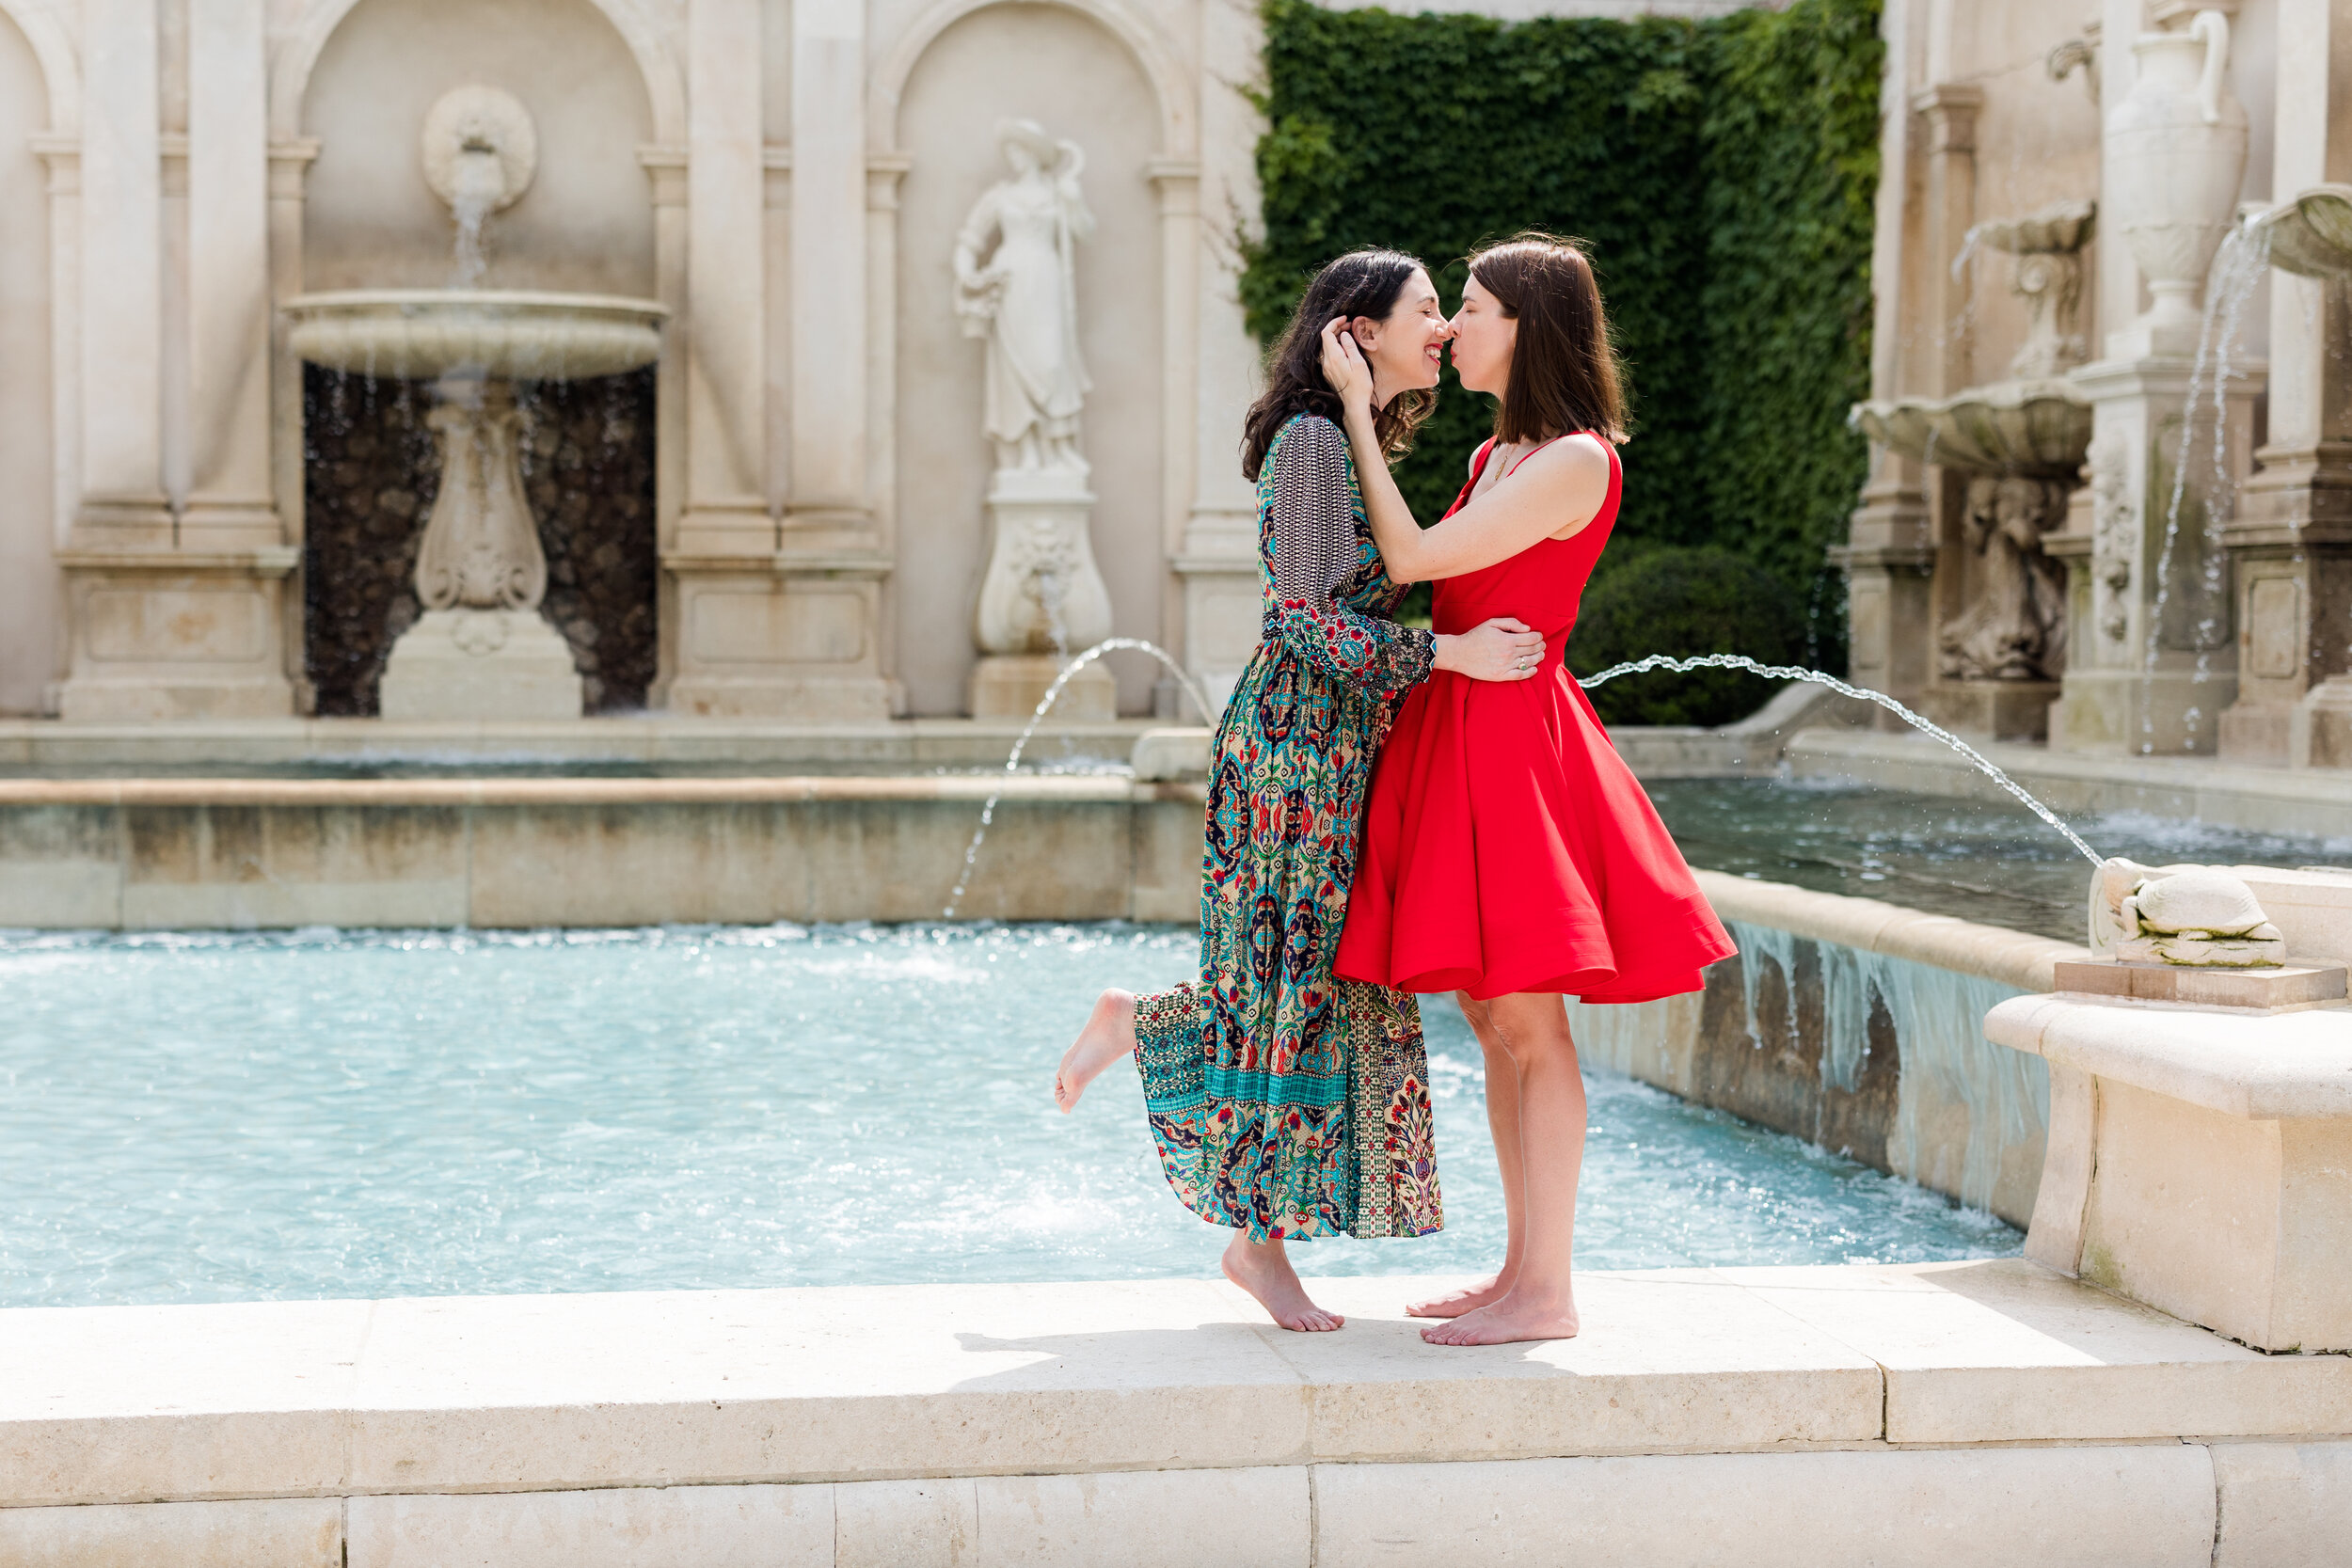 Dorothy-and-Kate-LGBTQ-Longwood-Gardens-Engagement-Session-97.jpg